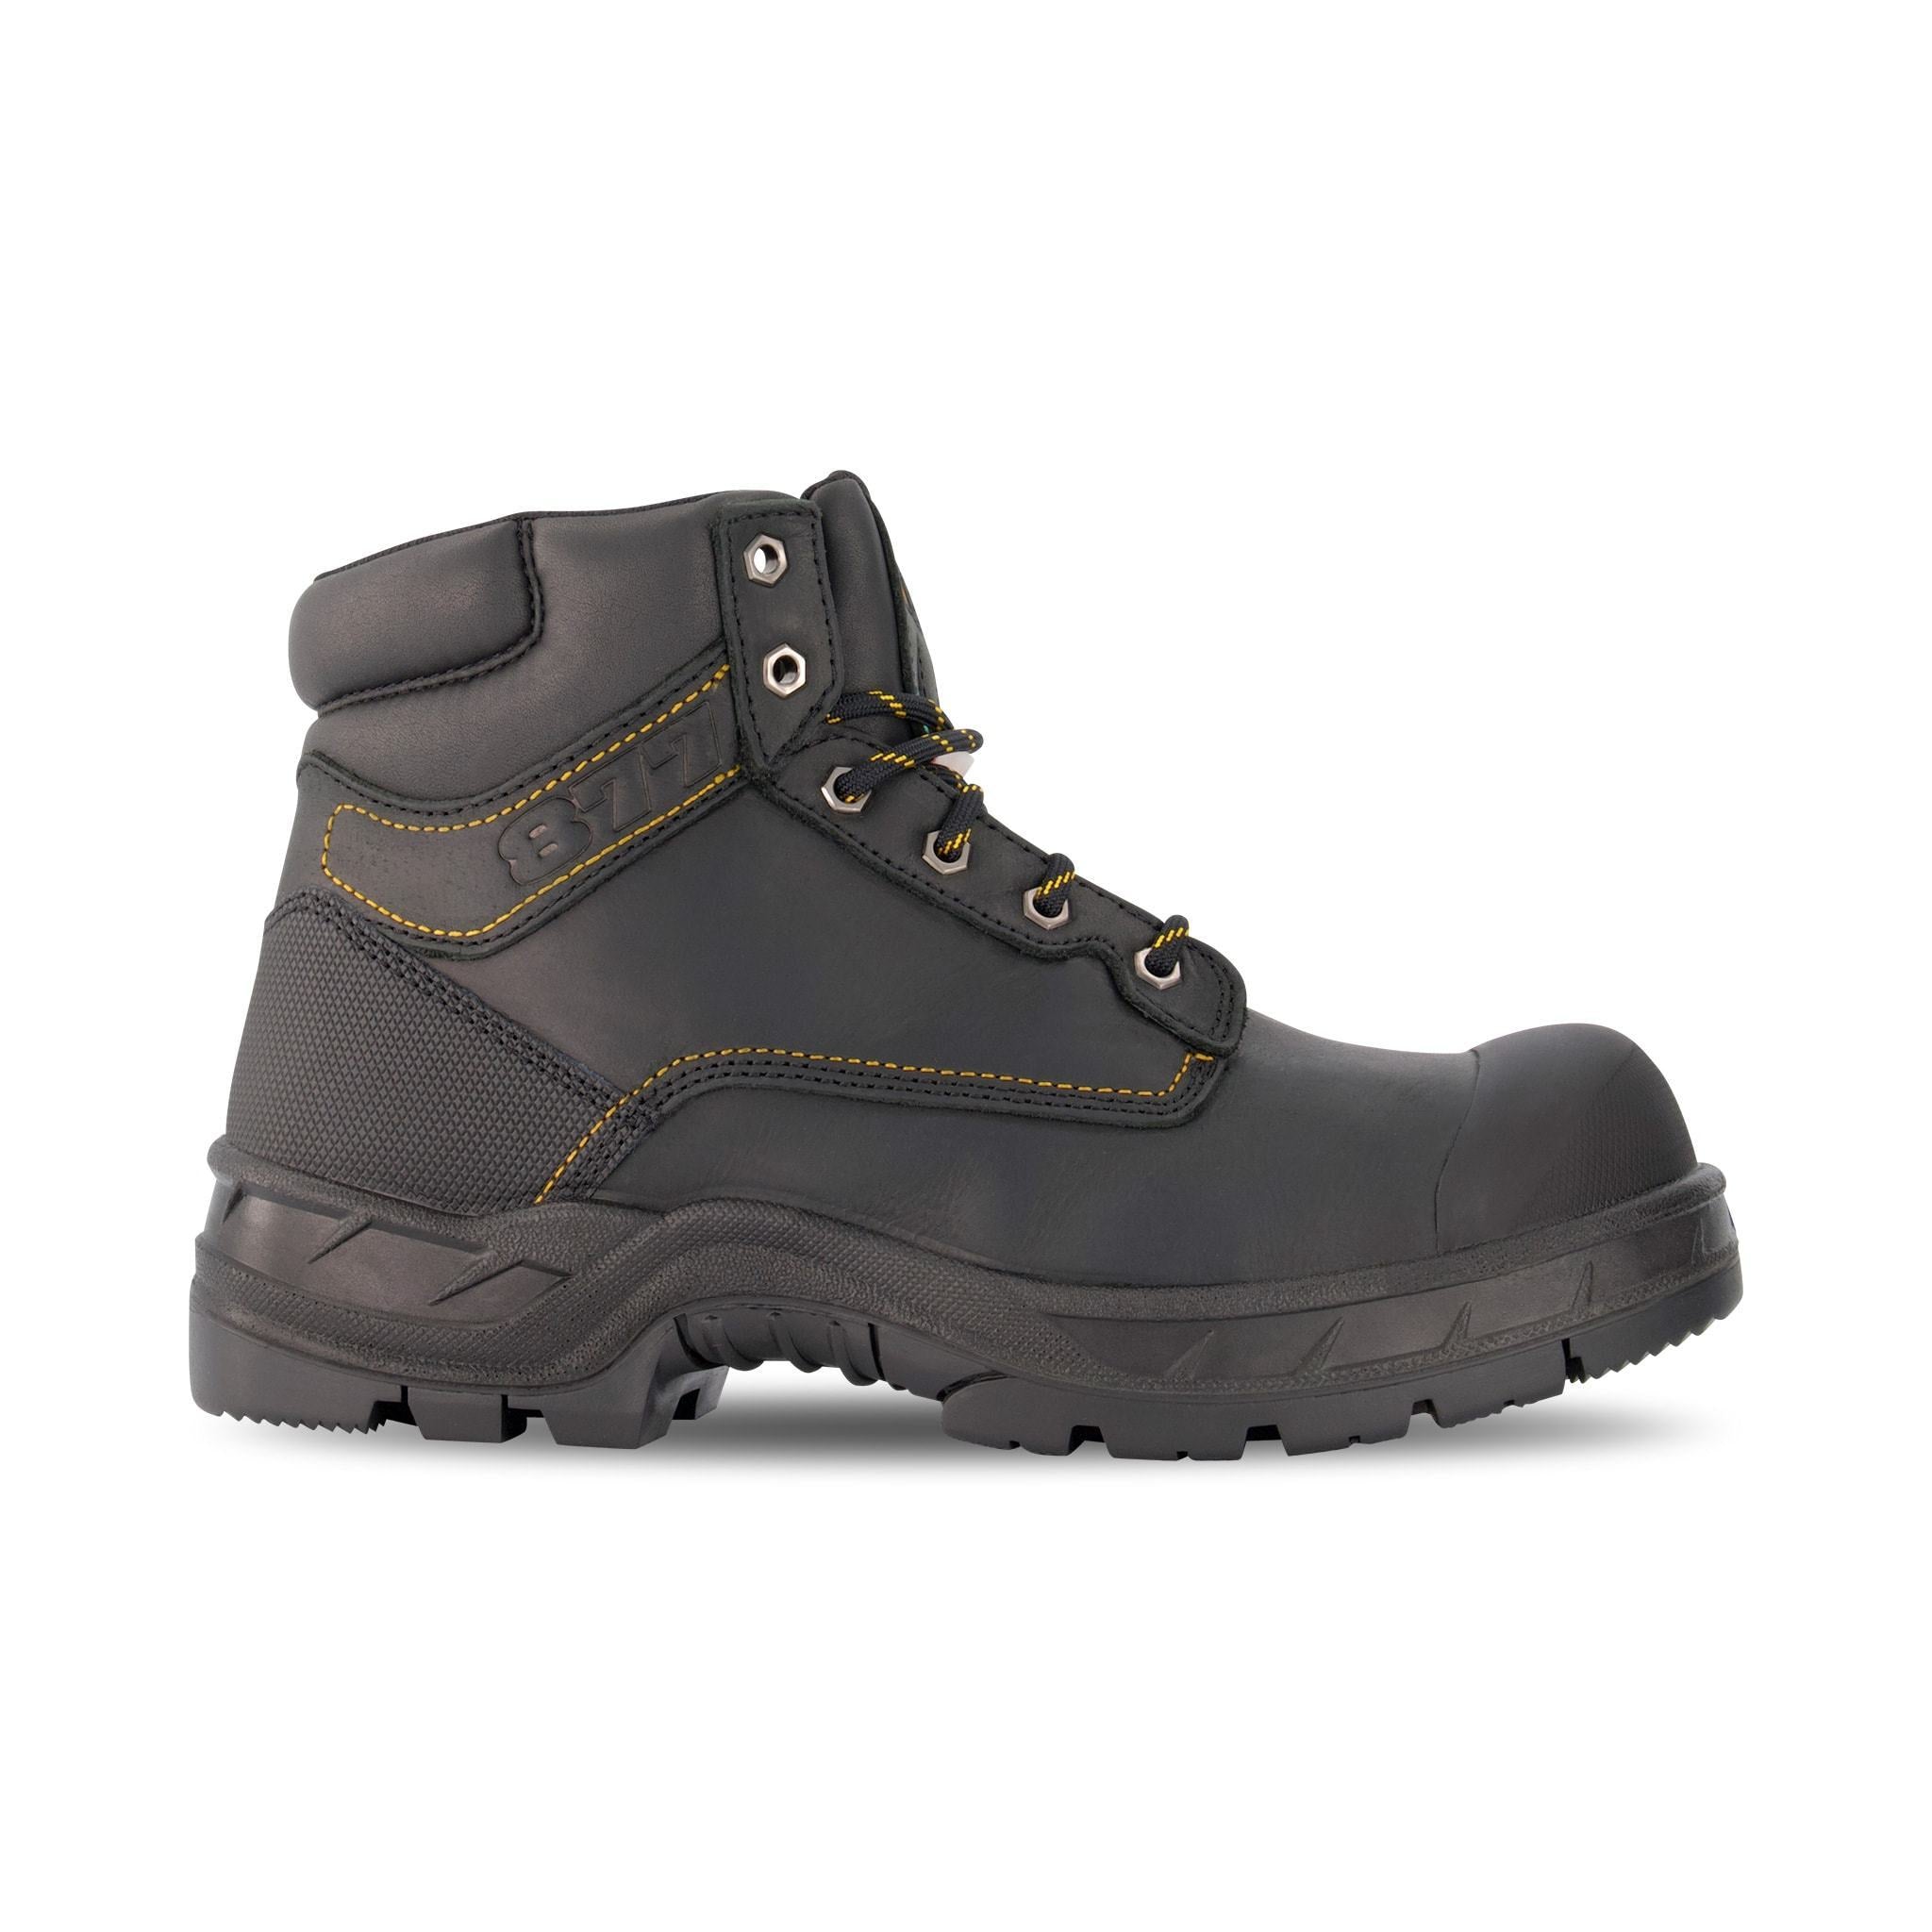 Men's 6 Inch Leather Safety Work Boots 